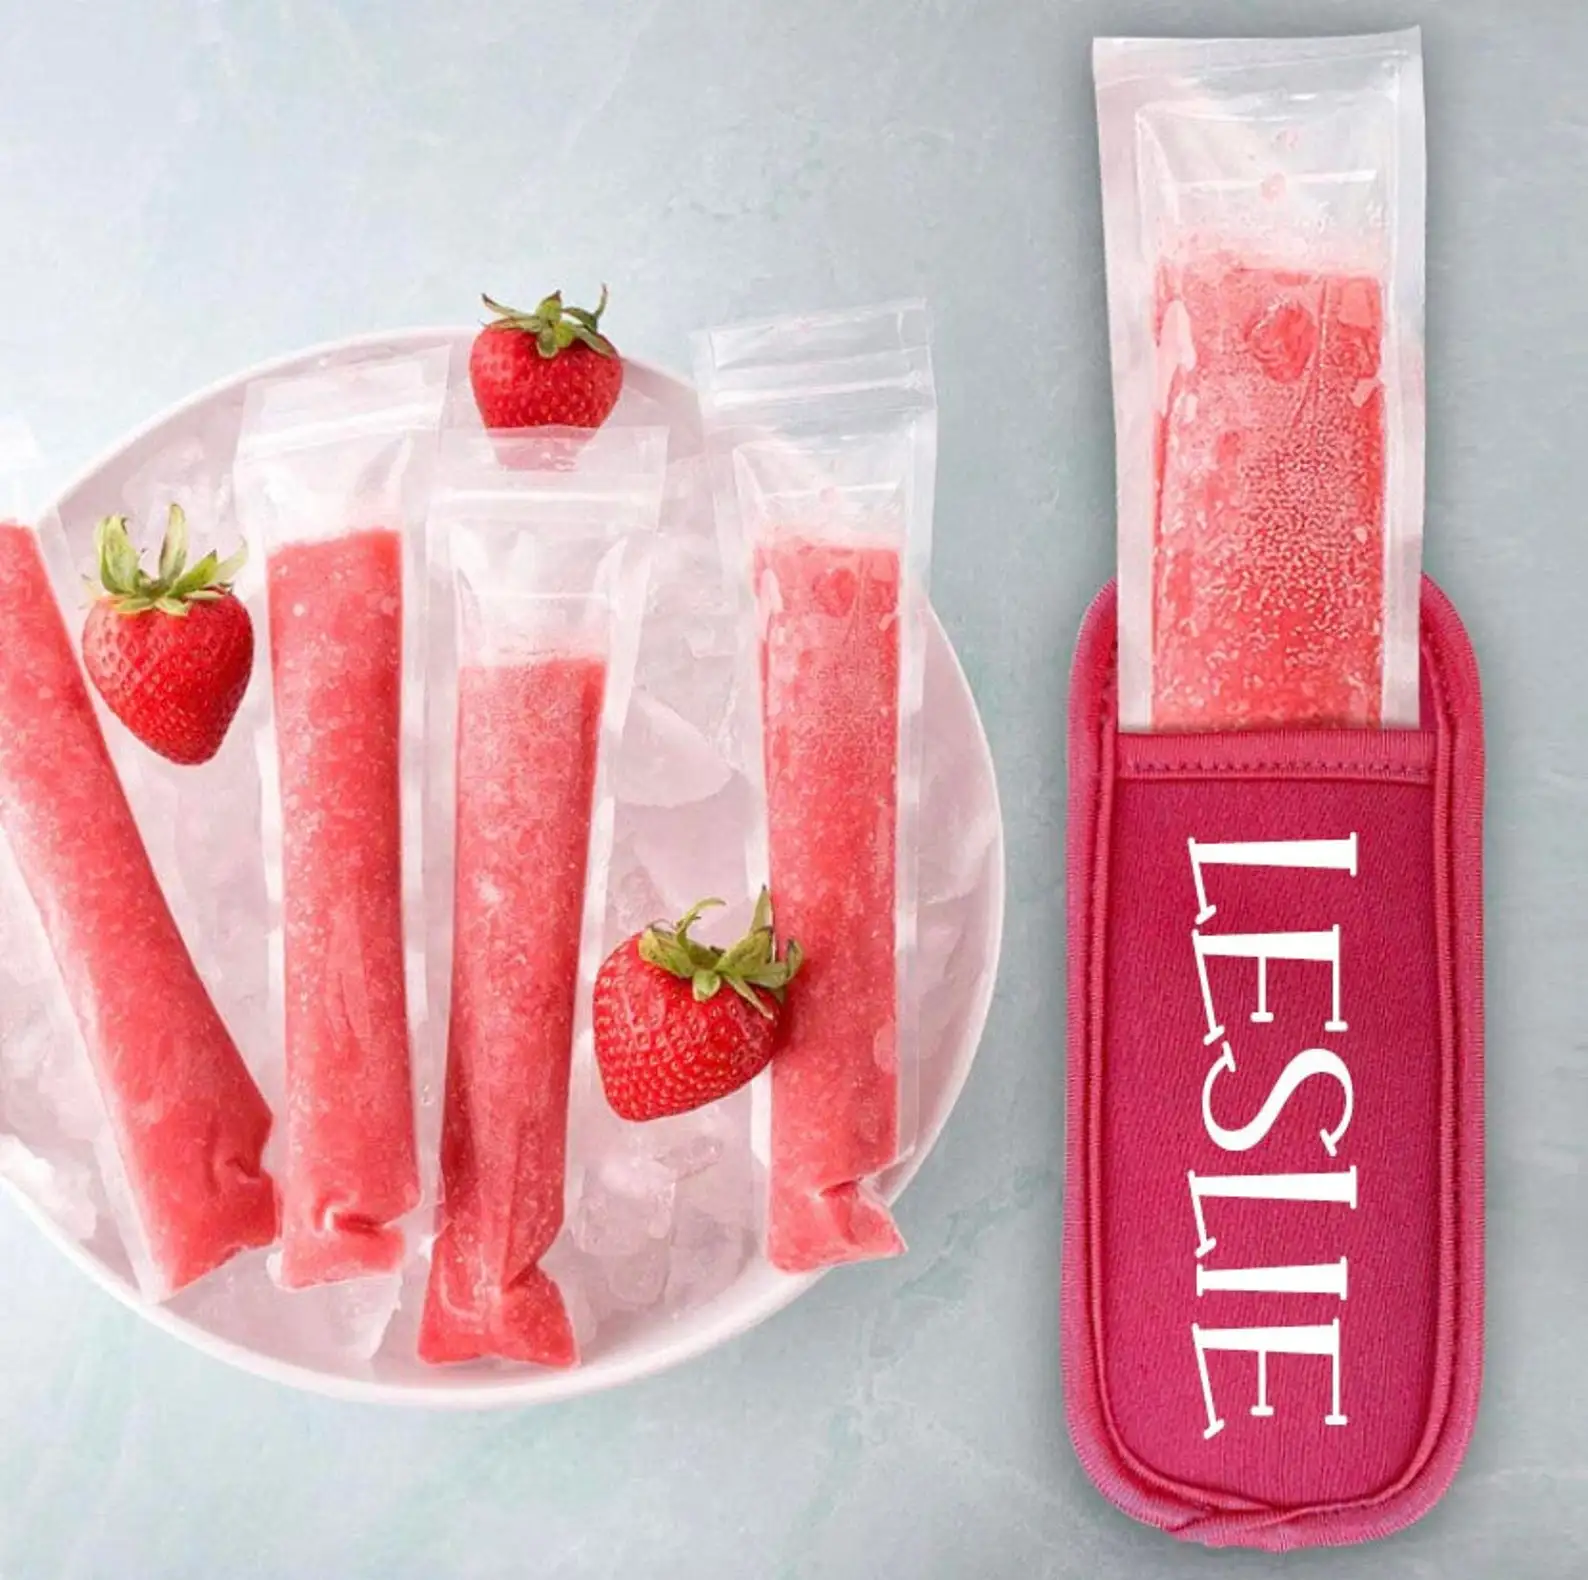 PERSONALIZED Sports Kids Popsicle Holder Ice Pop Sleeves Cover 